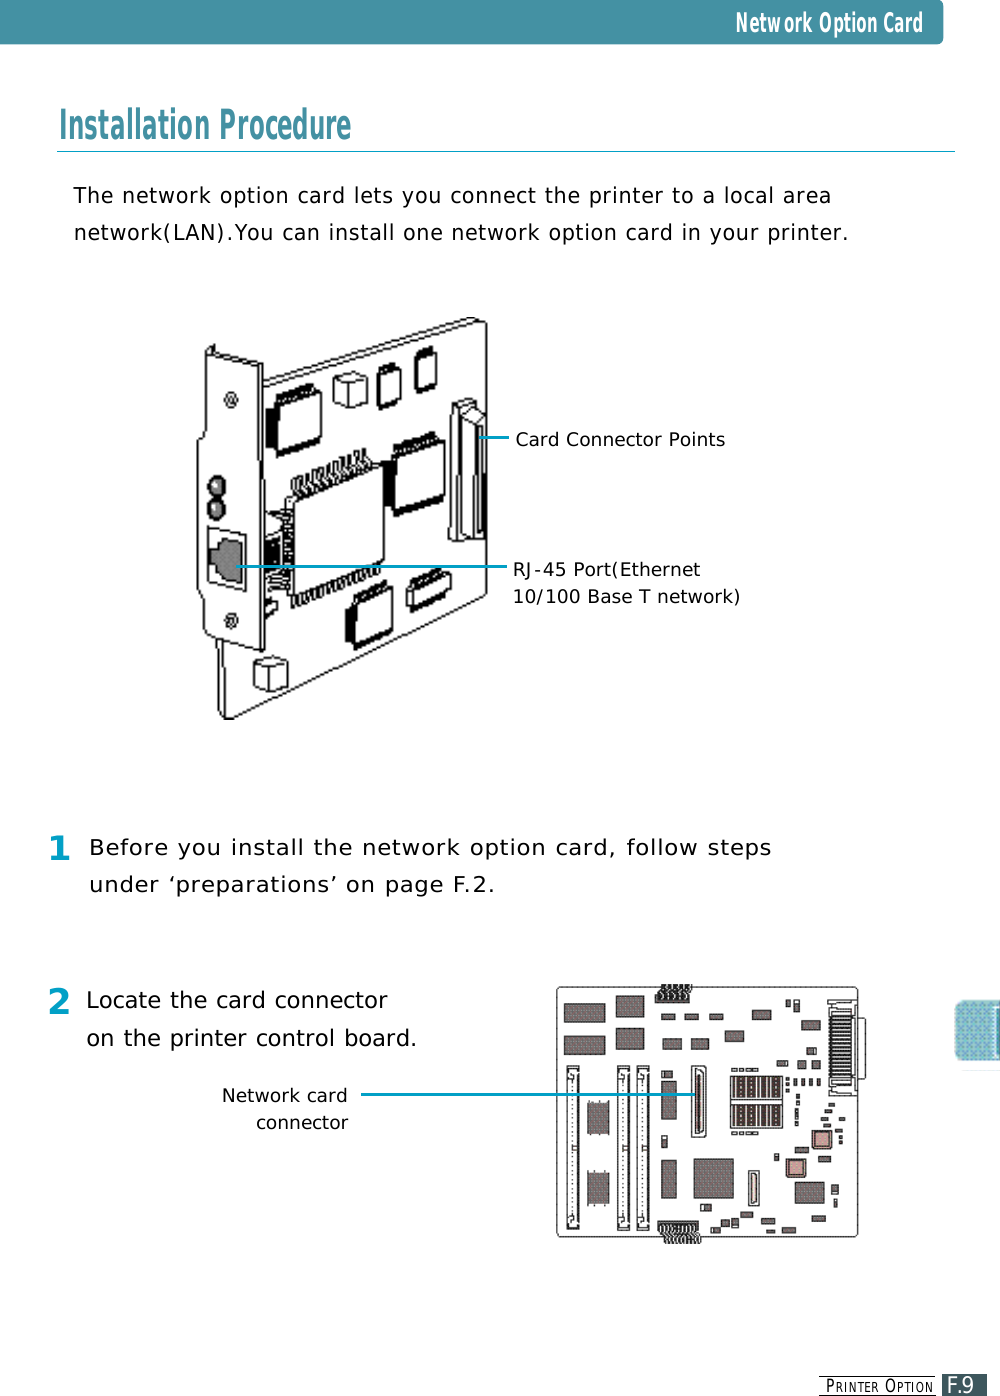 PR I N T E R OP T I O NF.9Network Option CardThe network option card lets you connect the printer to a local arean e t w o r k ( L A N ) . You can install one network option card in your printer.Card Connector PointsRJ-45 Port(Ethernet10/100 Base T network)Installation Procedure1Before you install the network option card, follow steps under ‘preparations’ on page F. 2 .2Locate the card connector on the printer control board.Network cardconnector